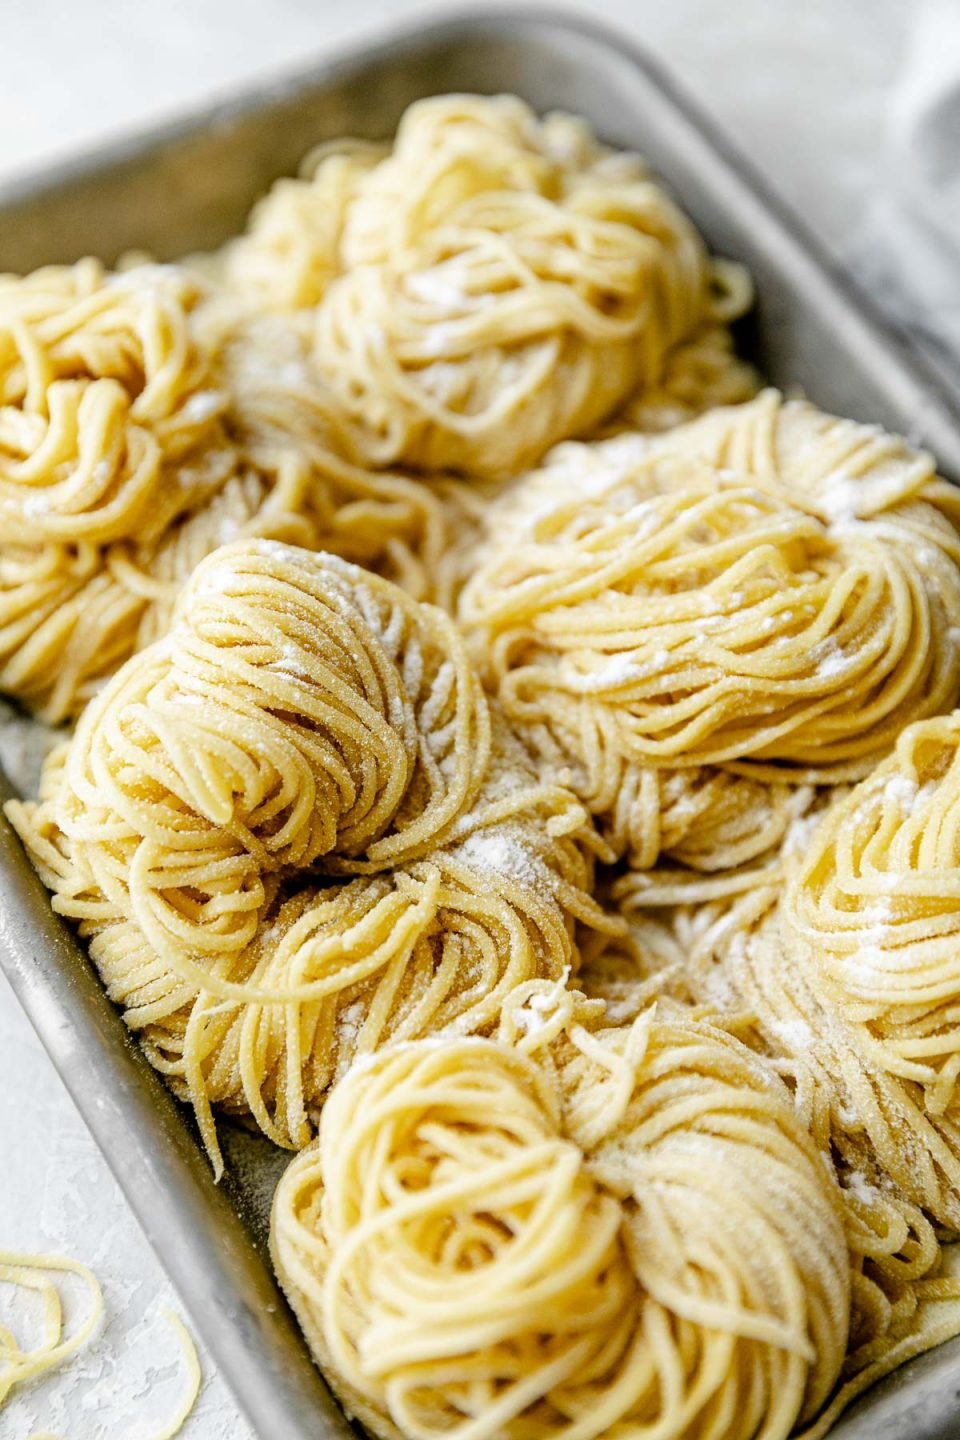 A side angle shot of six bundles of fresh pasta cut into spaghetti noodles are arranged on a small aluminum baking sheet and dusted with semolina flour. The baking sheet sits atop a white textured surface. A light blue napkin & a few stray noodles surround the baking sheet.